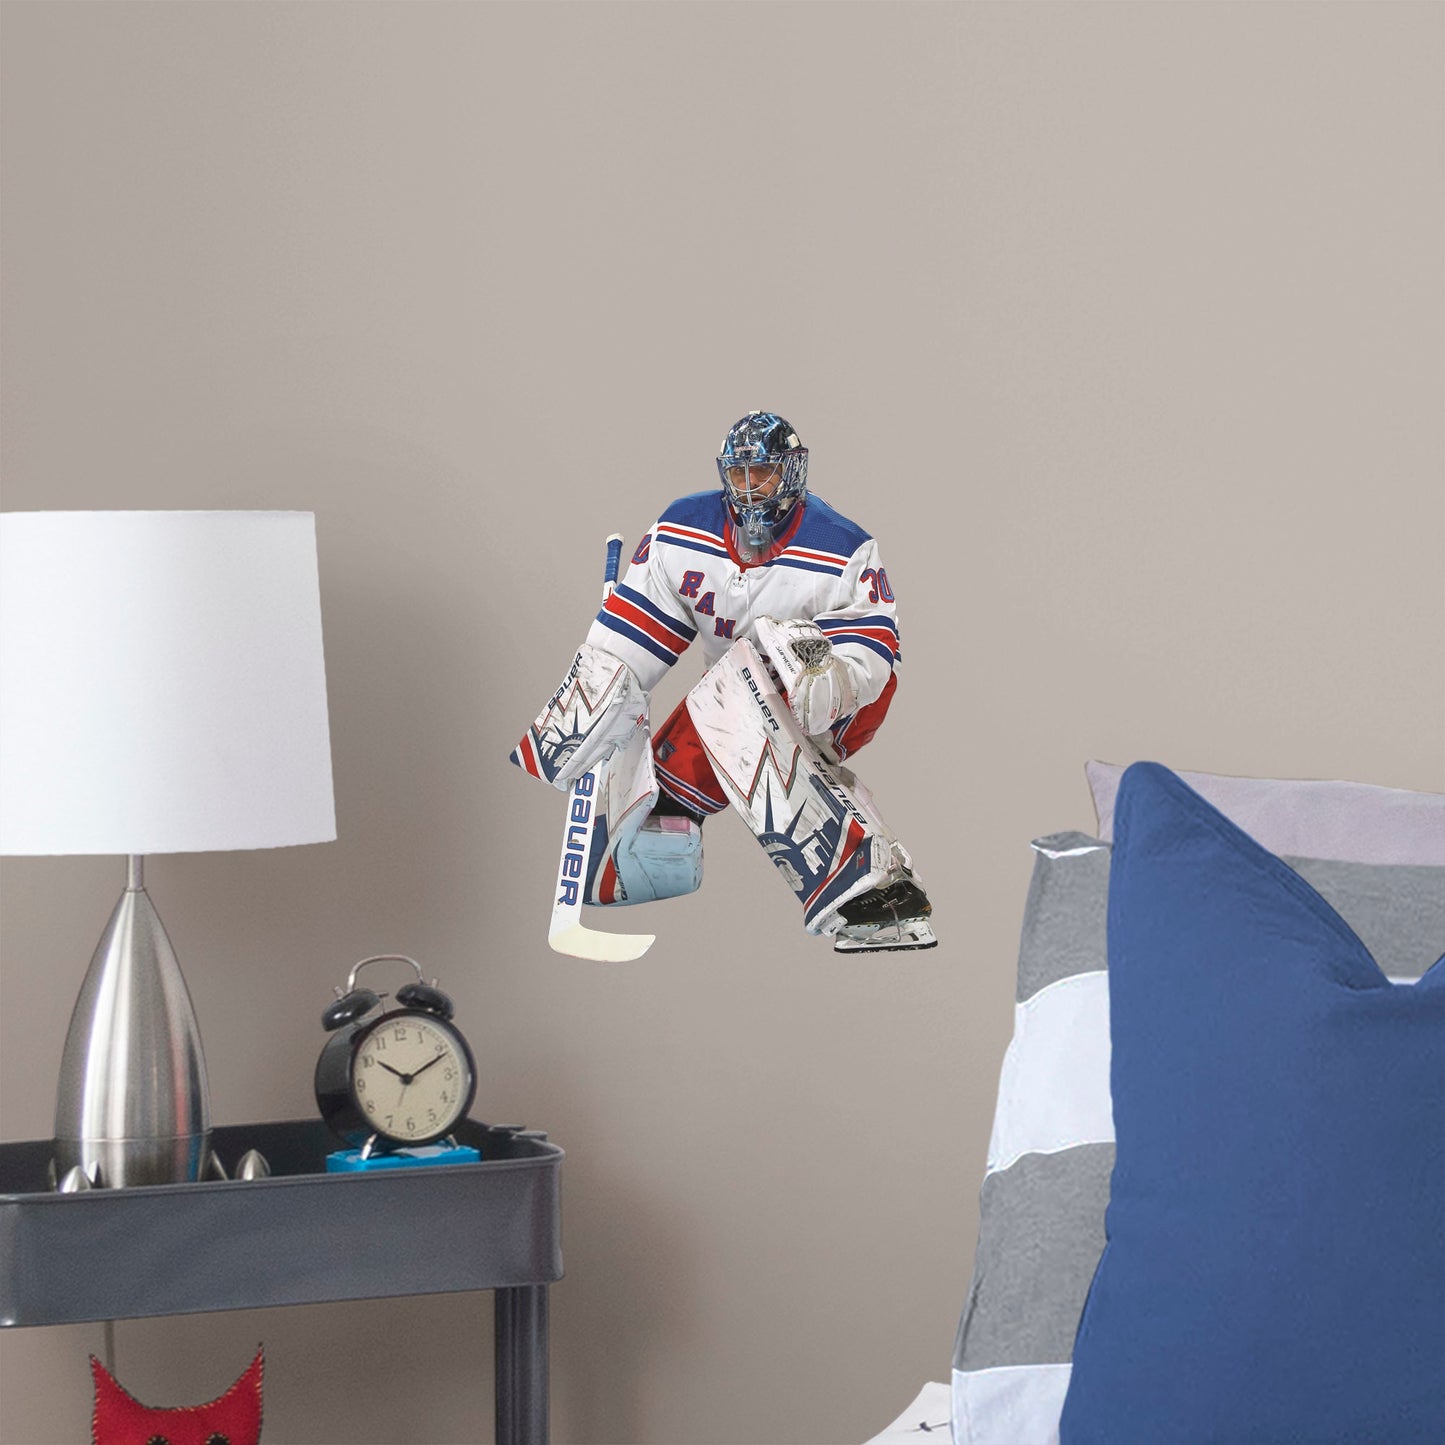 Large Athlete + 2 Decals (12"W x 15"H) Nothing gets past The King! Celebrate the impressive goaltending career of Henrik Lundqvist with this sturdy removable wall decal set depicting him poised to stop that puck. The gold-medal-winning hockey player looks great on any office or bedroom wall, and, unlike this goalie, the decal can be repositioned over time. It's also a great gift for anyone who appreciates Lundqvist's unique approach to tending goal!